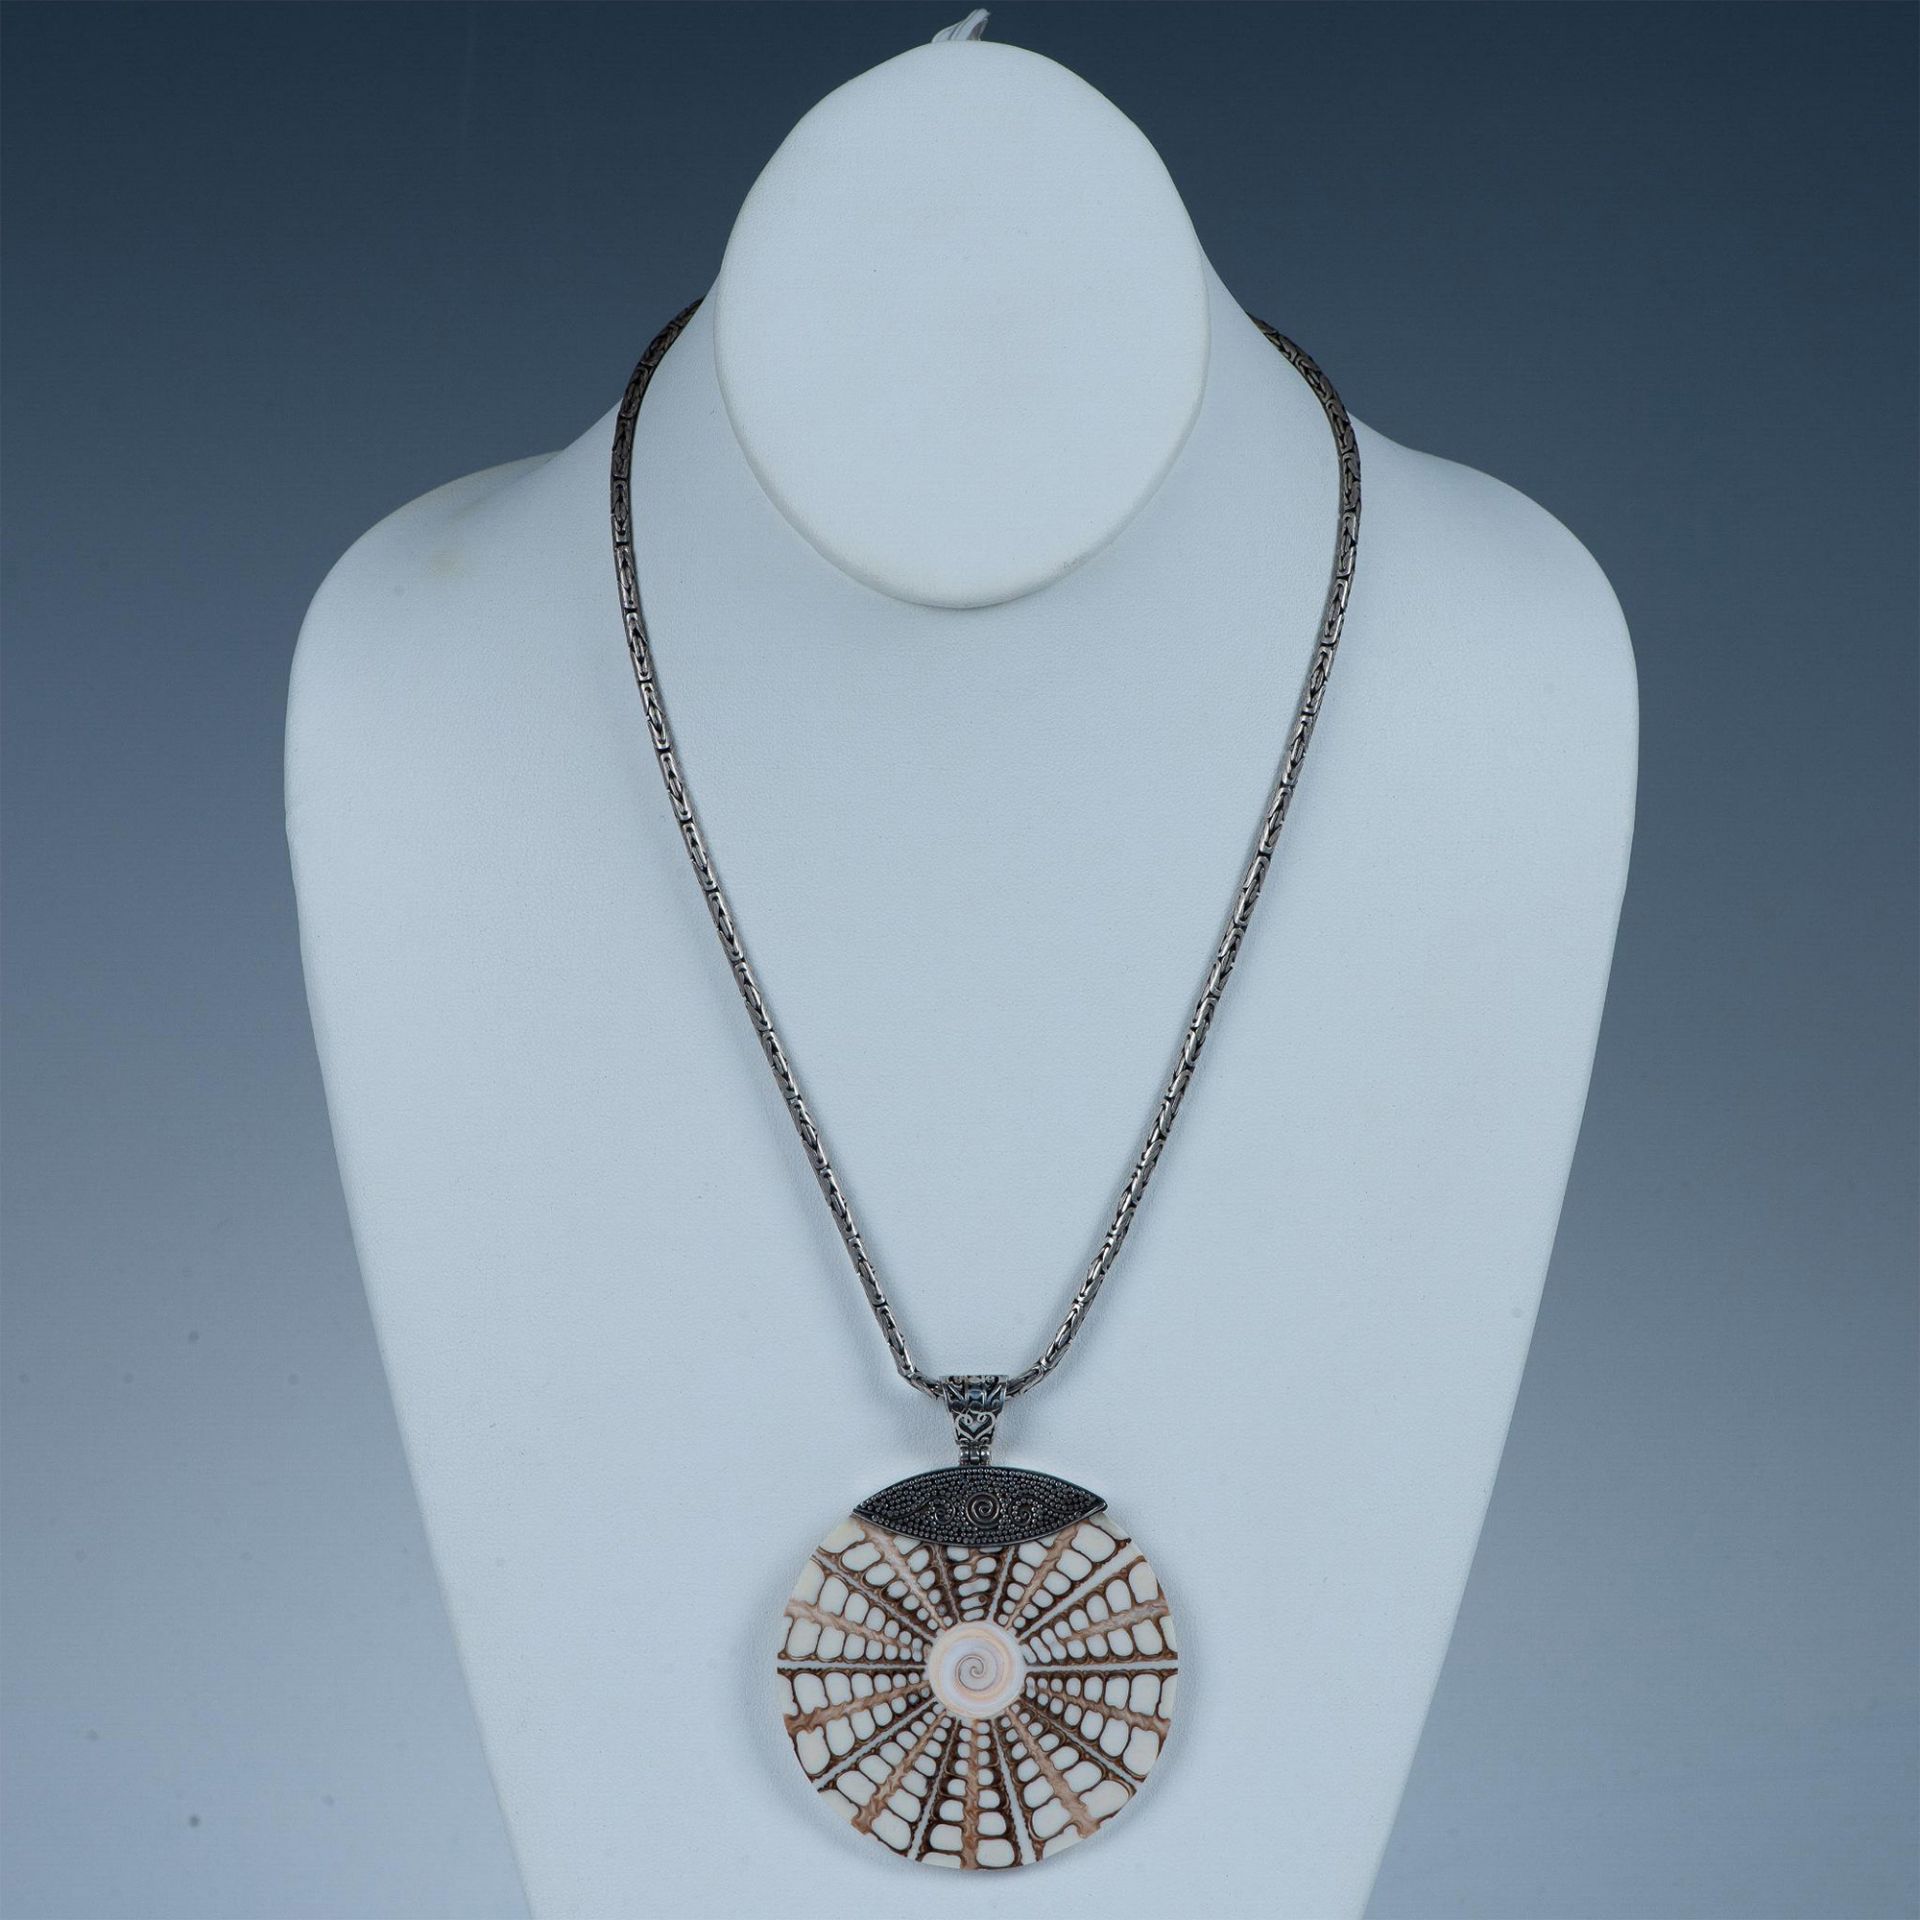 Bold Sterling Silver & Cone Shell Pendant Necklace - Image 2 of 4